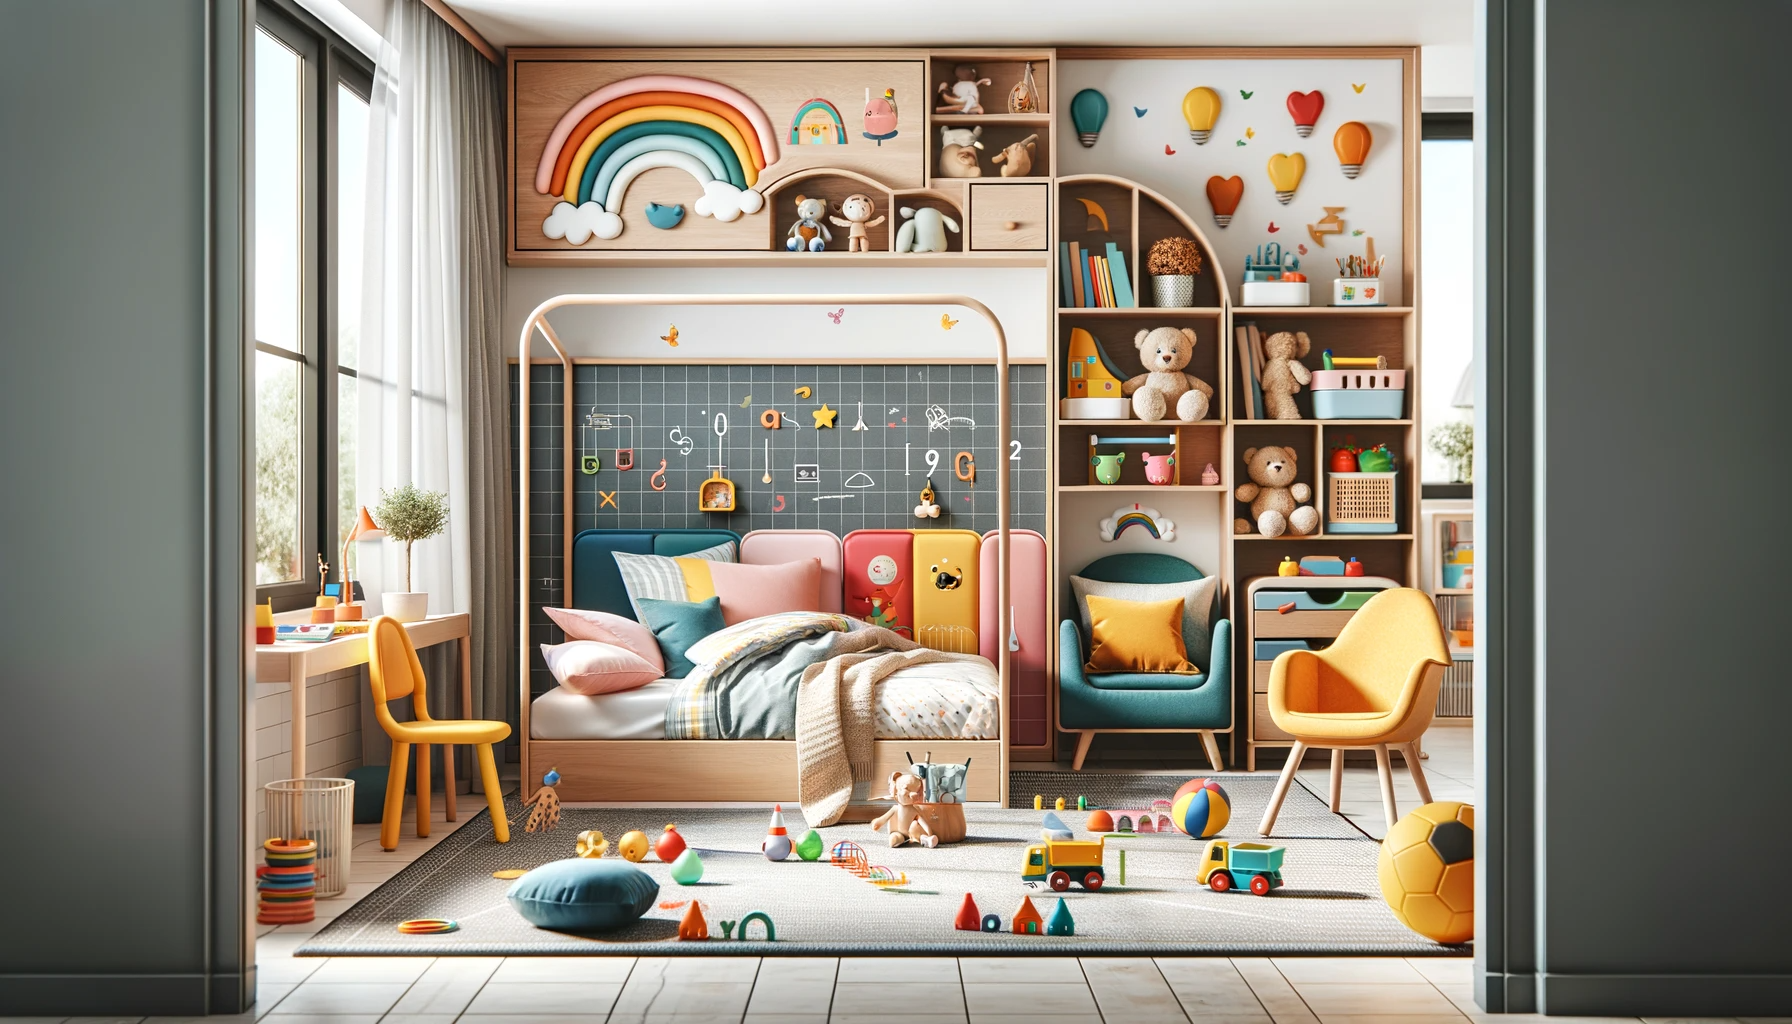 Designing Dream Spaces: How Quality Children's Furniture Makes a Different